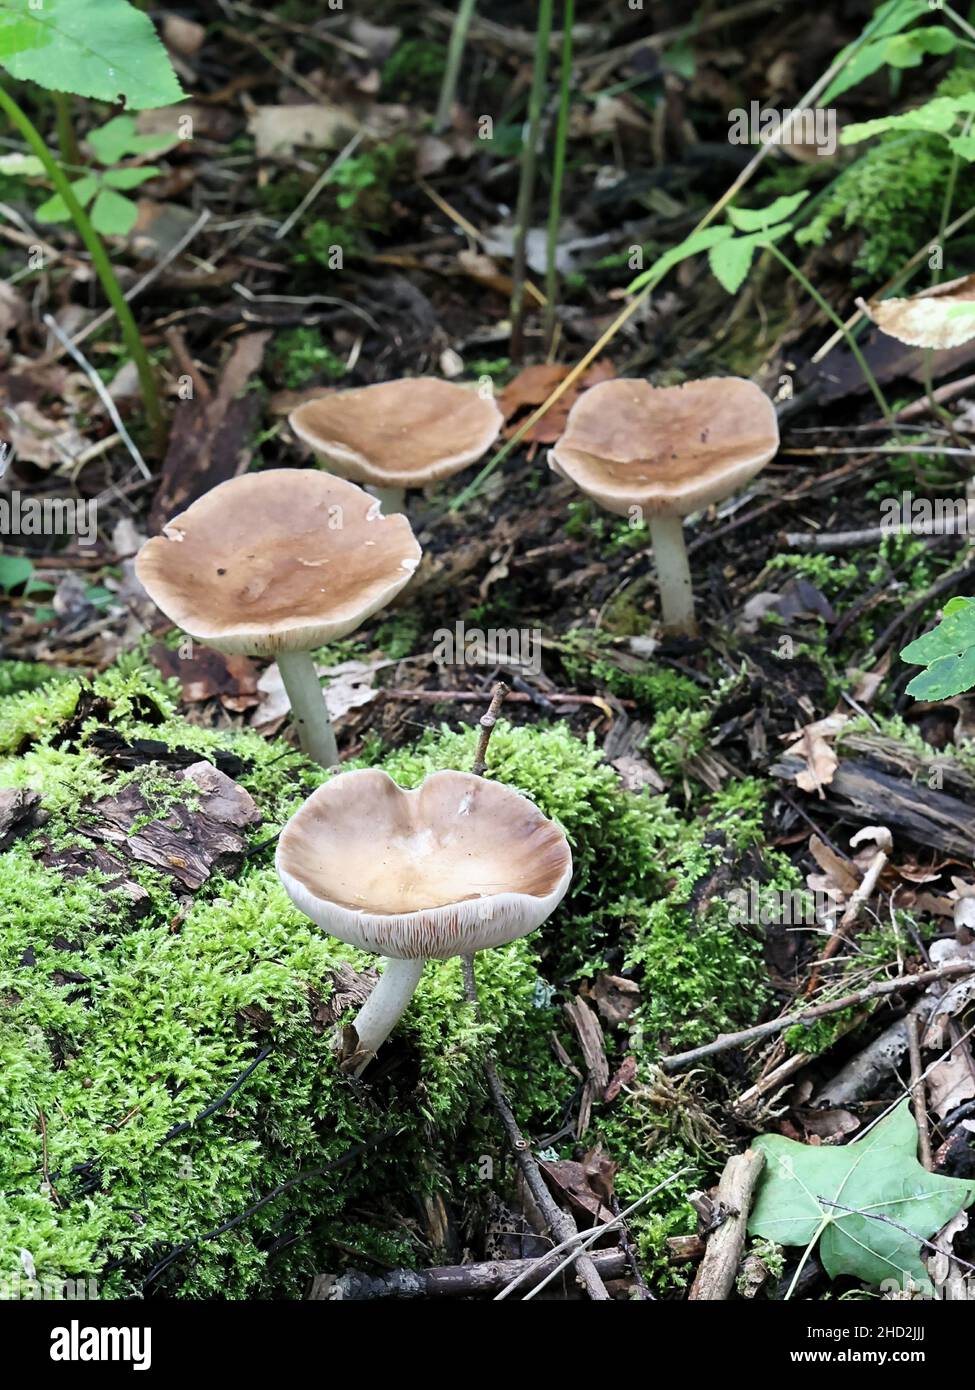 Pluteus cervinus, also known as Pluteus atricapillus, commonly called deer shield or fawn mushroom, wild fungus from Finland Stock Photo